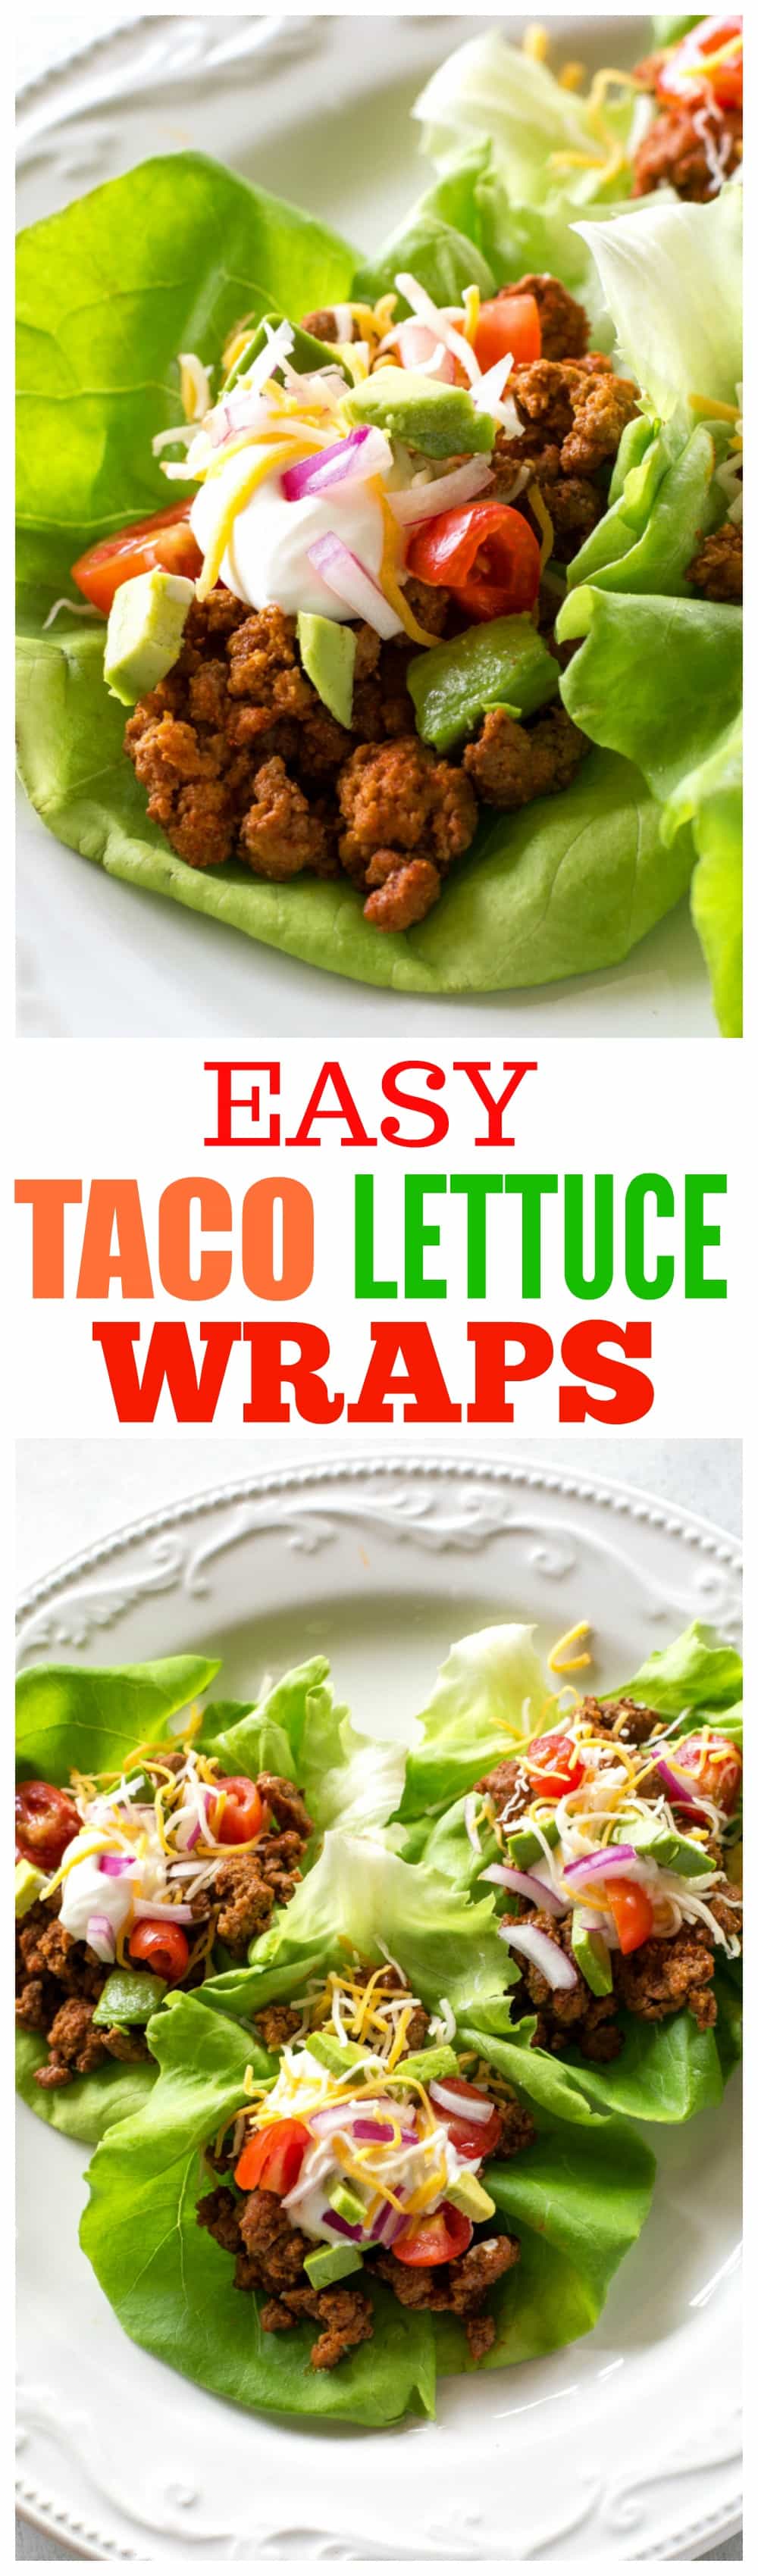 Easy Taco Lettuce Wraps - a low-carb version of taco night! #easy #taco #lettuce #wraps #dinner #recipe #mexican